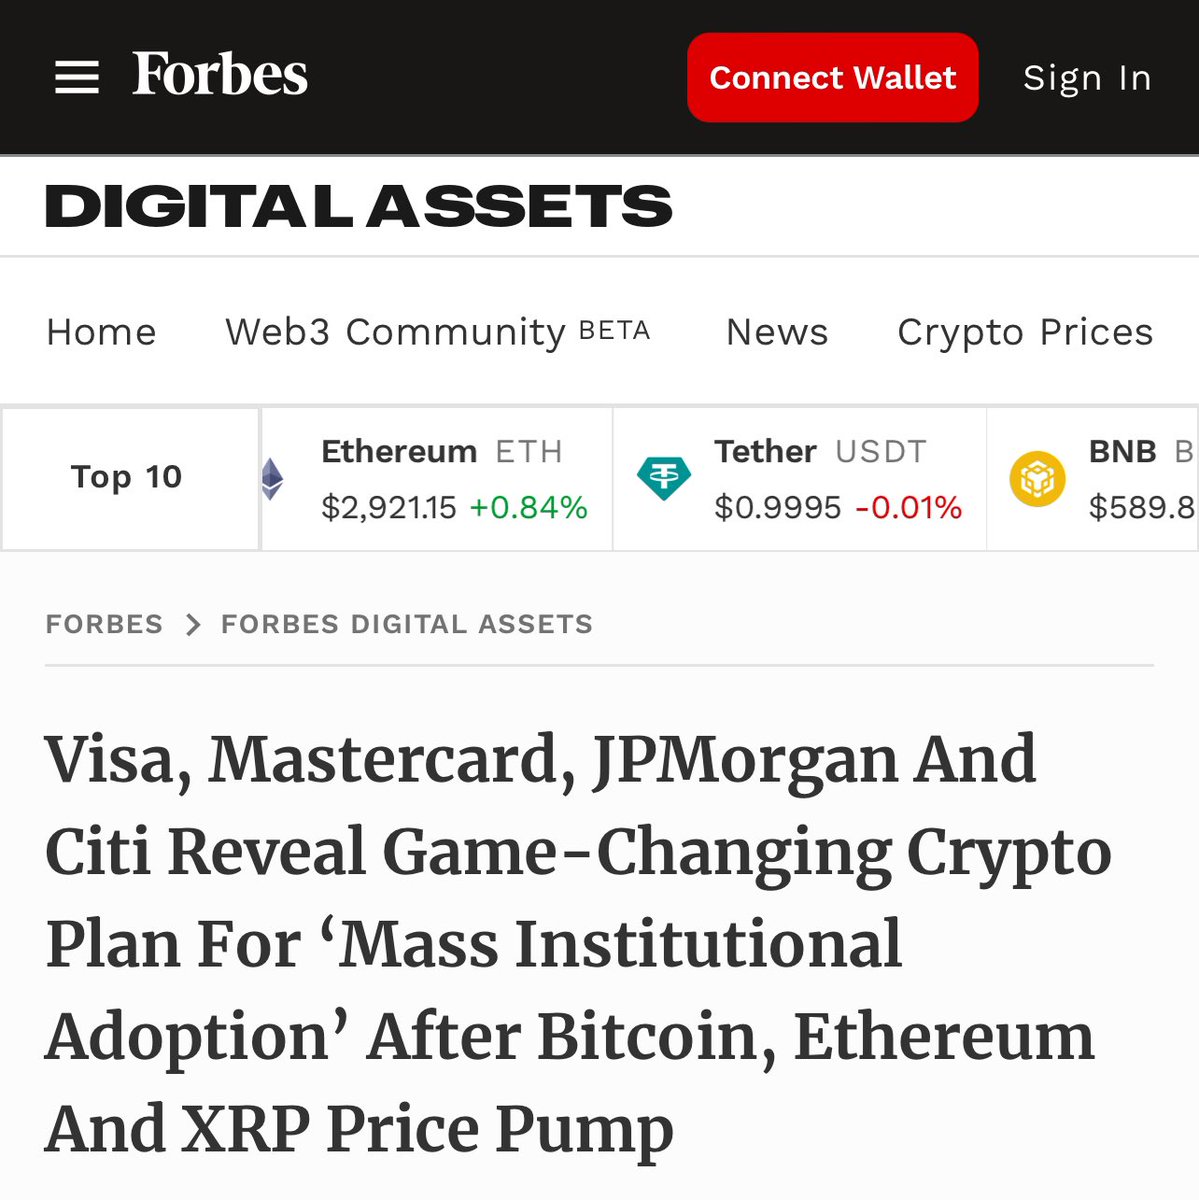 🚨 Visa, Mastercard, JPMorgan And Citi Reveal Game-Changing Crypto Plan For ‘Mass Institutional Adoption’ #XRP looks like the winner! WITH XRPL Capable of running enough transactions to meet the needs! There will be huge volumes on XRPL defi in the coming weeks and month,…